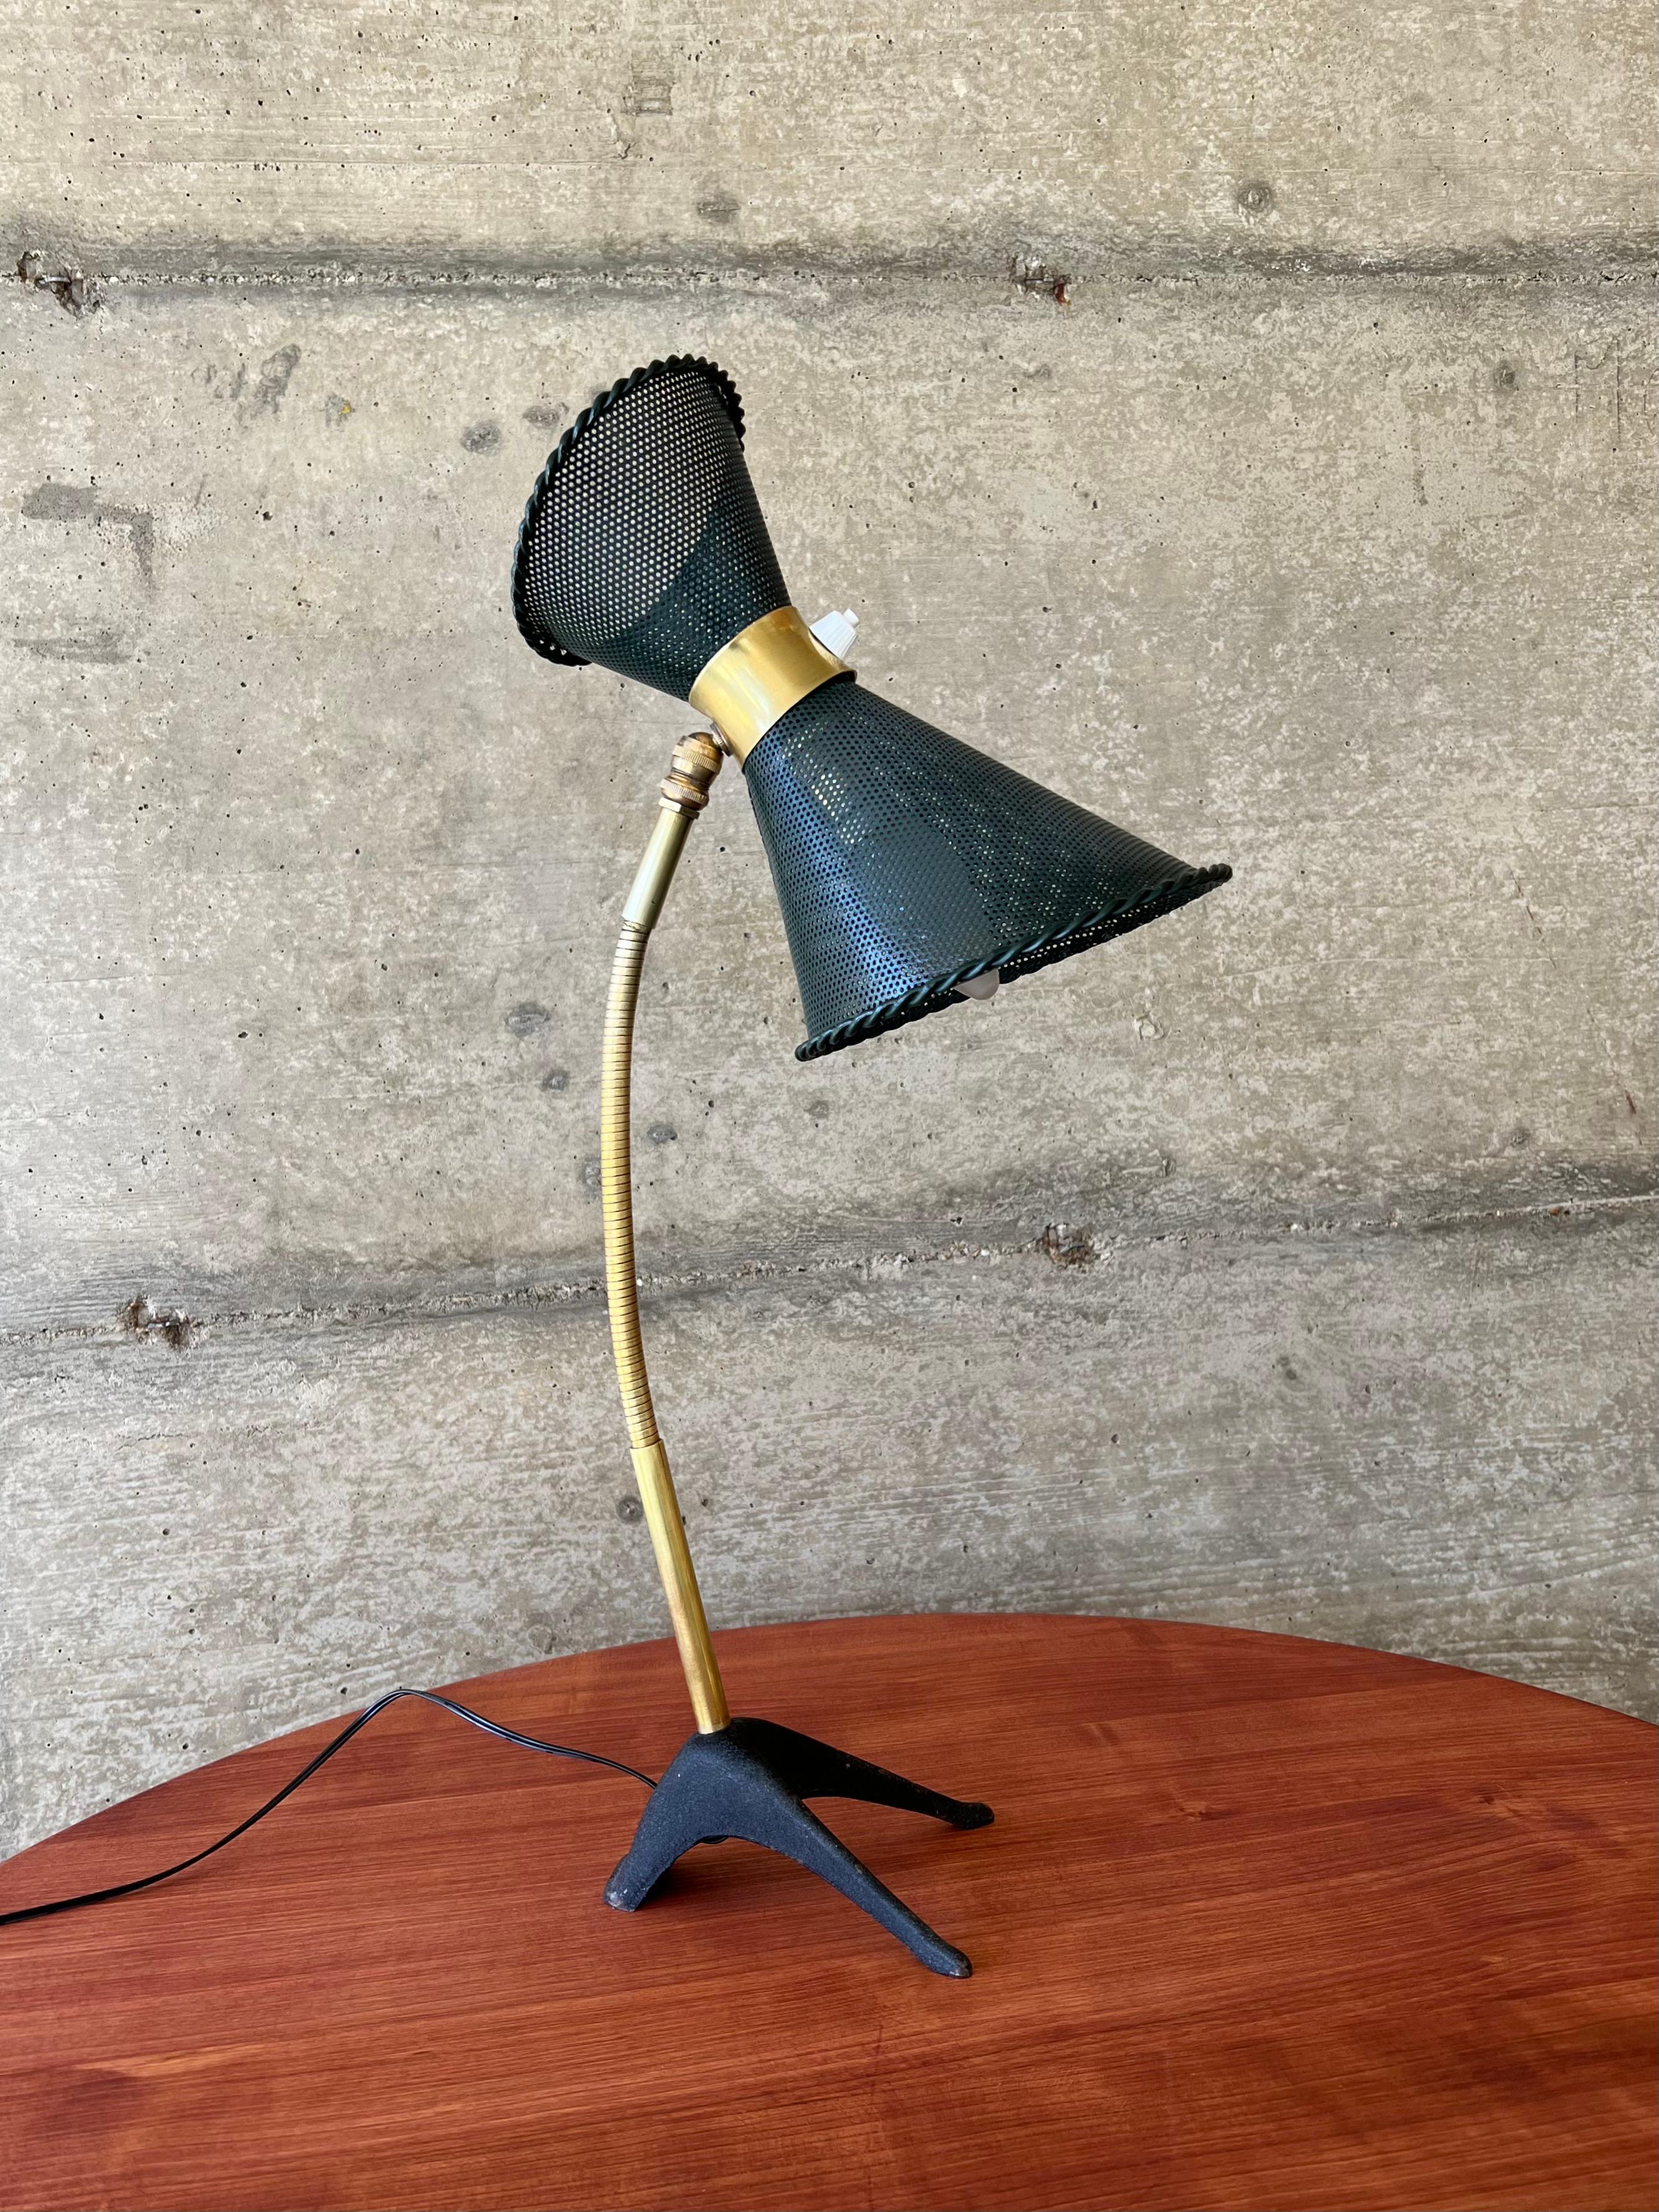 Very rare French table lamp designed by Mathieu Matégot, executed by Atelier-Matégot. A beautiful lampshade in the shape of a diabolo, perforated metal which made Matégot famous. The lamp is in its original condition and color, only the lampshade